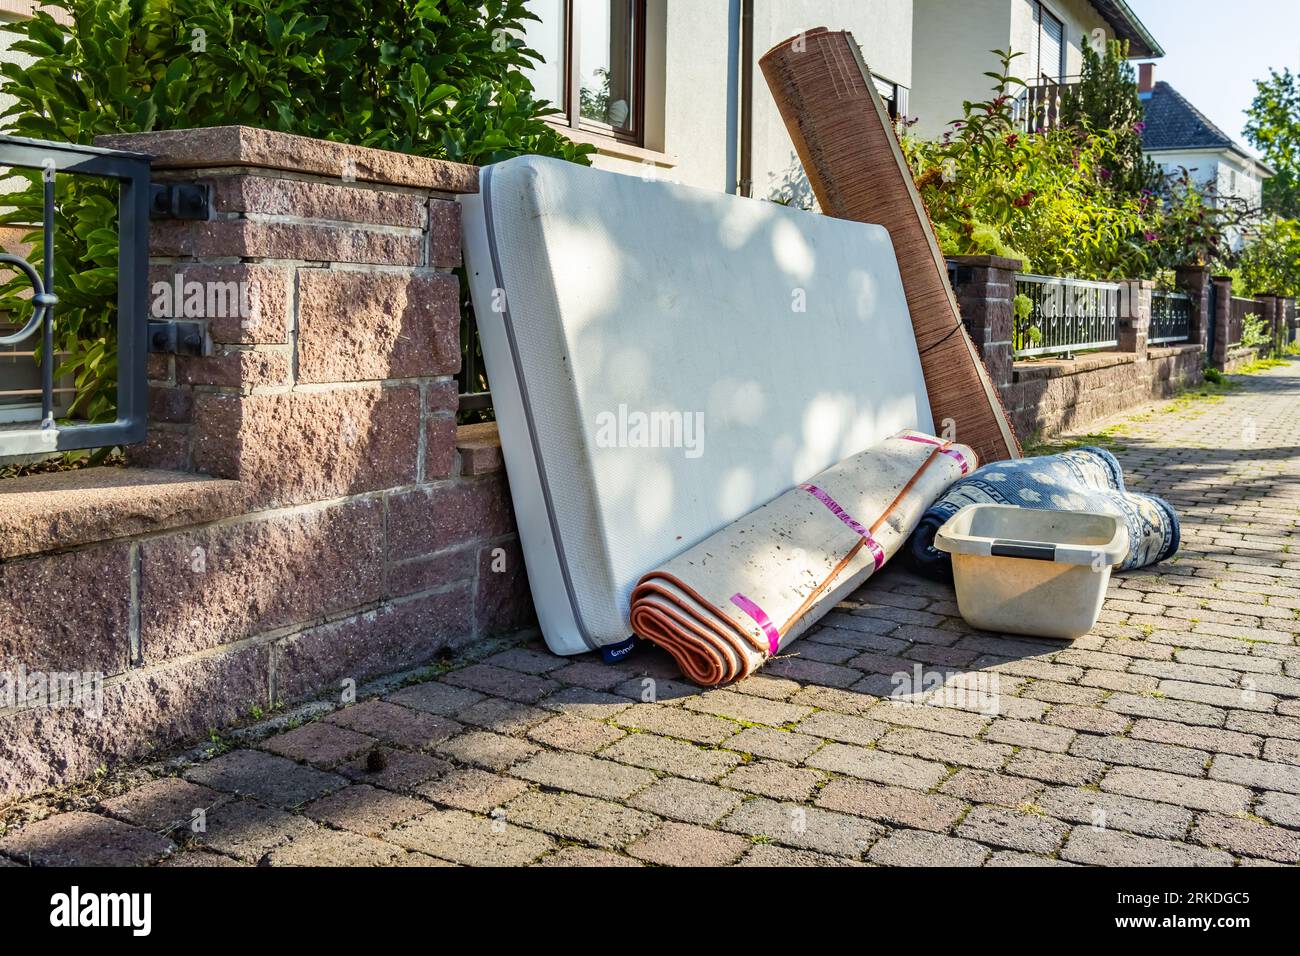 Bulk garbage day concept, miscellaneous rubbish items put on a street for council bulk waste collection, bulky waste and waste management Stock Photo